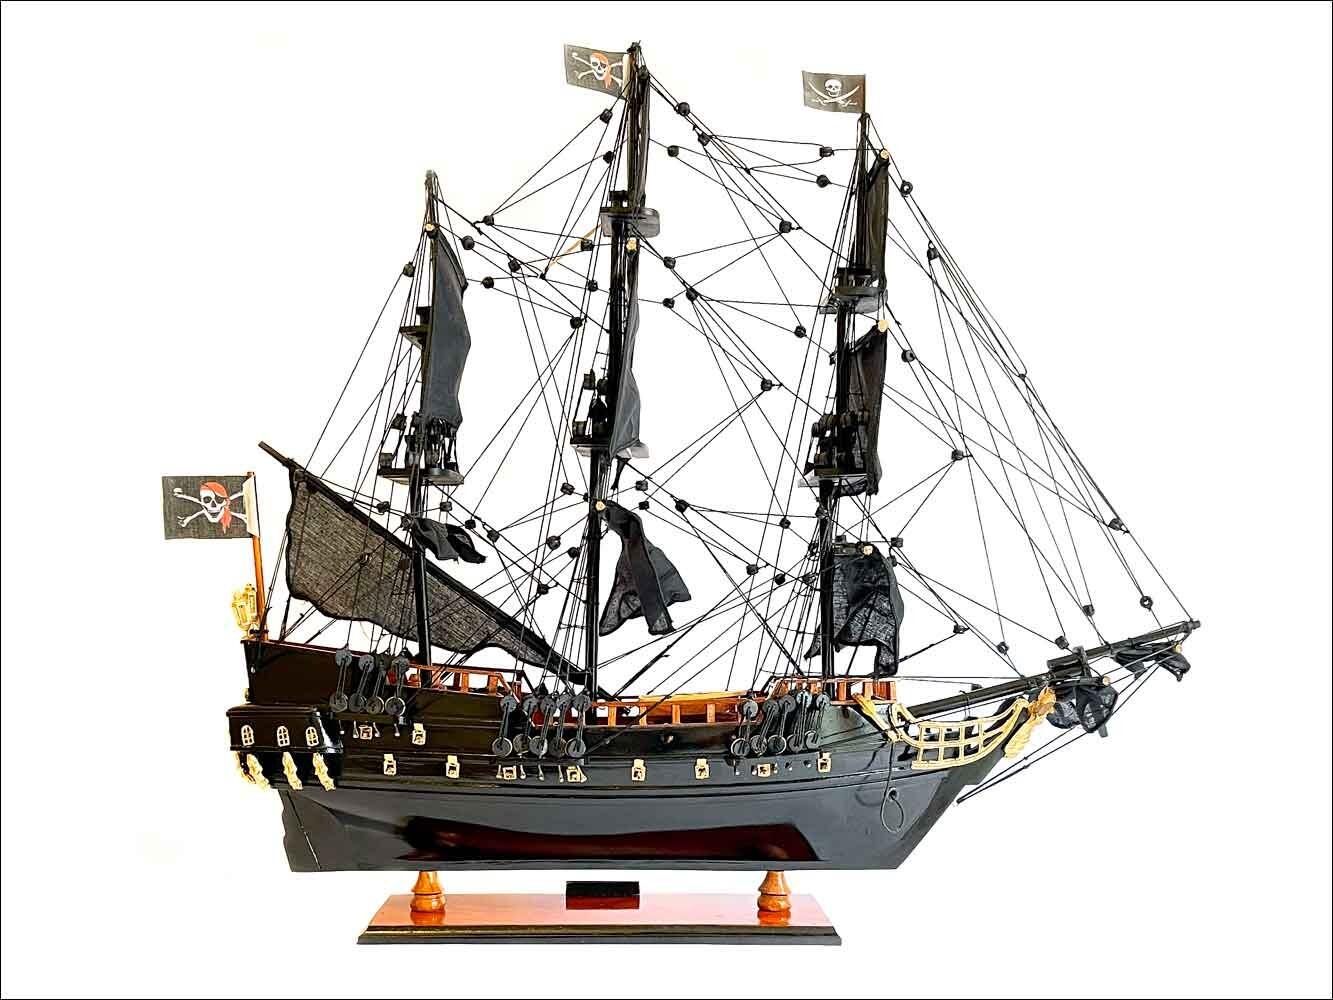 The Black Pearl featured in the film Pirates of the Caribbean.